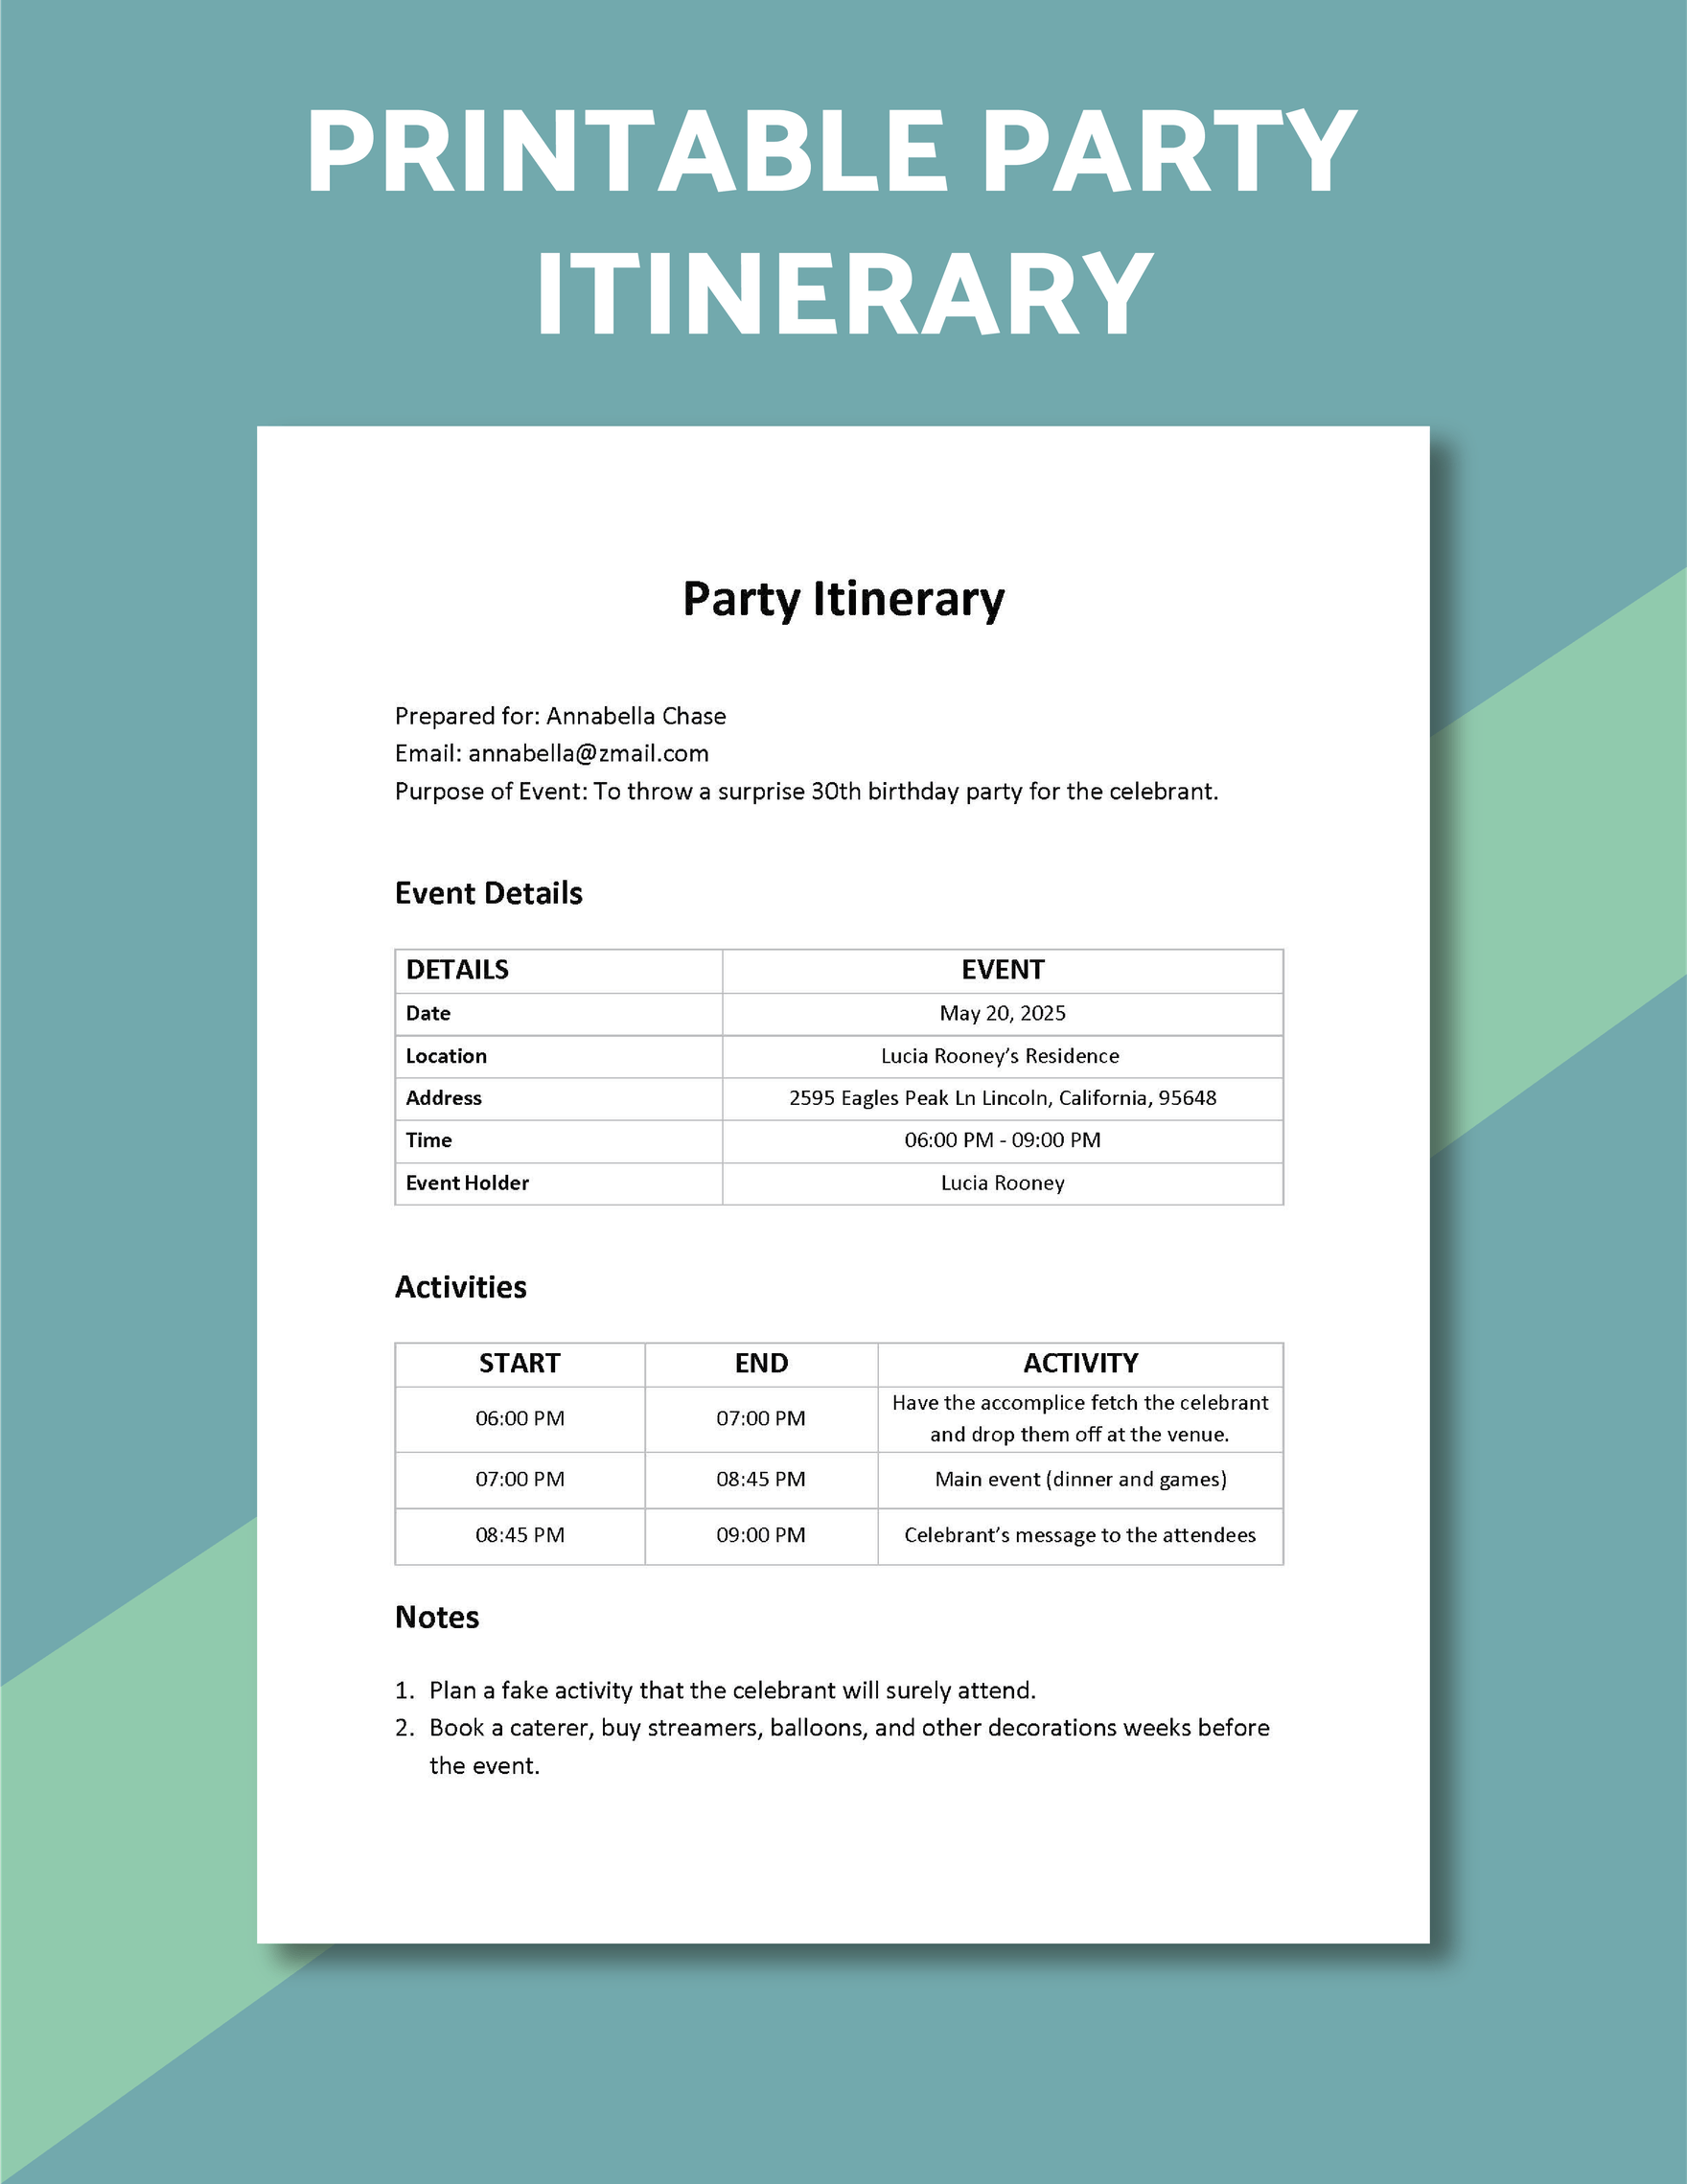 Printable Party Itinerary Template